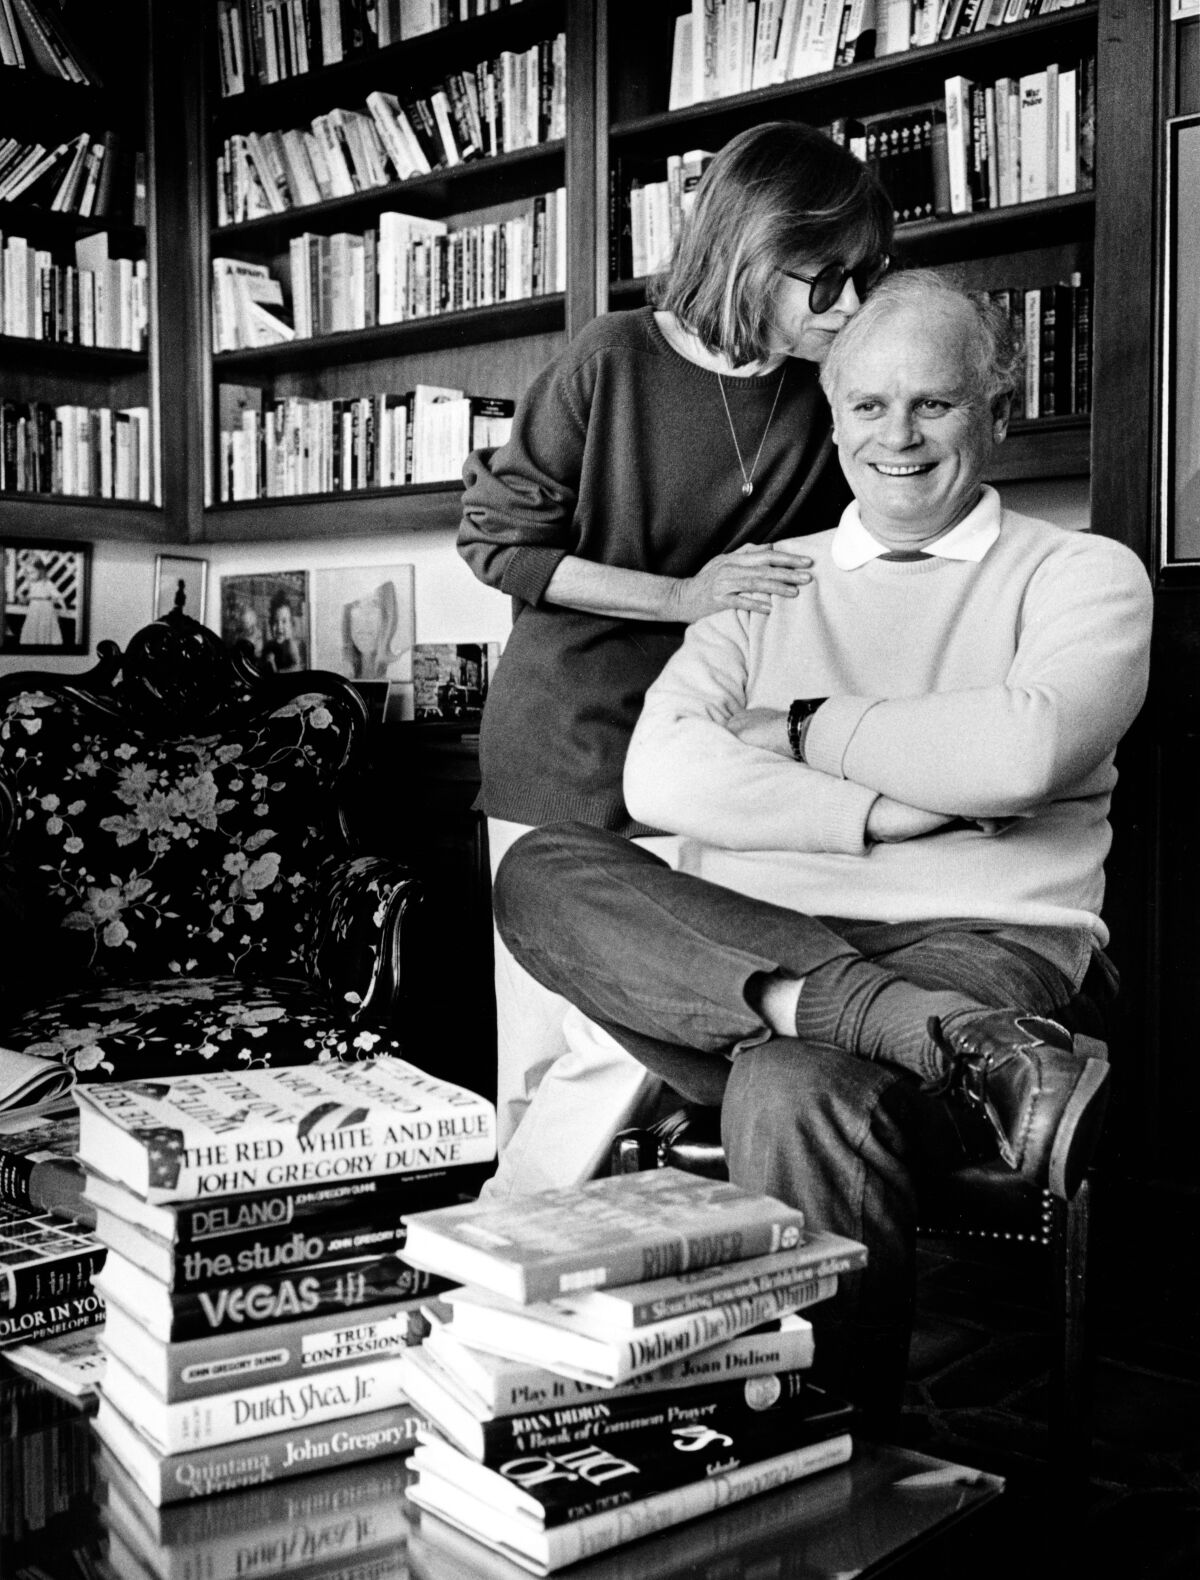 Black and white photo of a woman kissing a seated man on the head surrounded by books